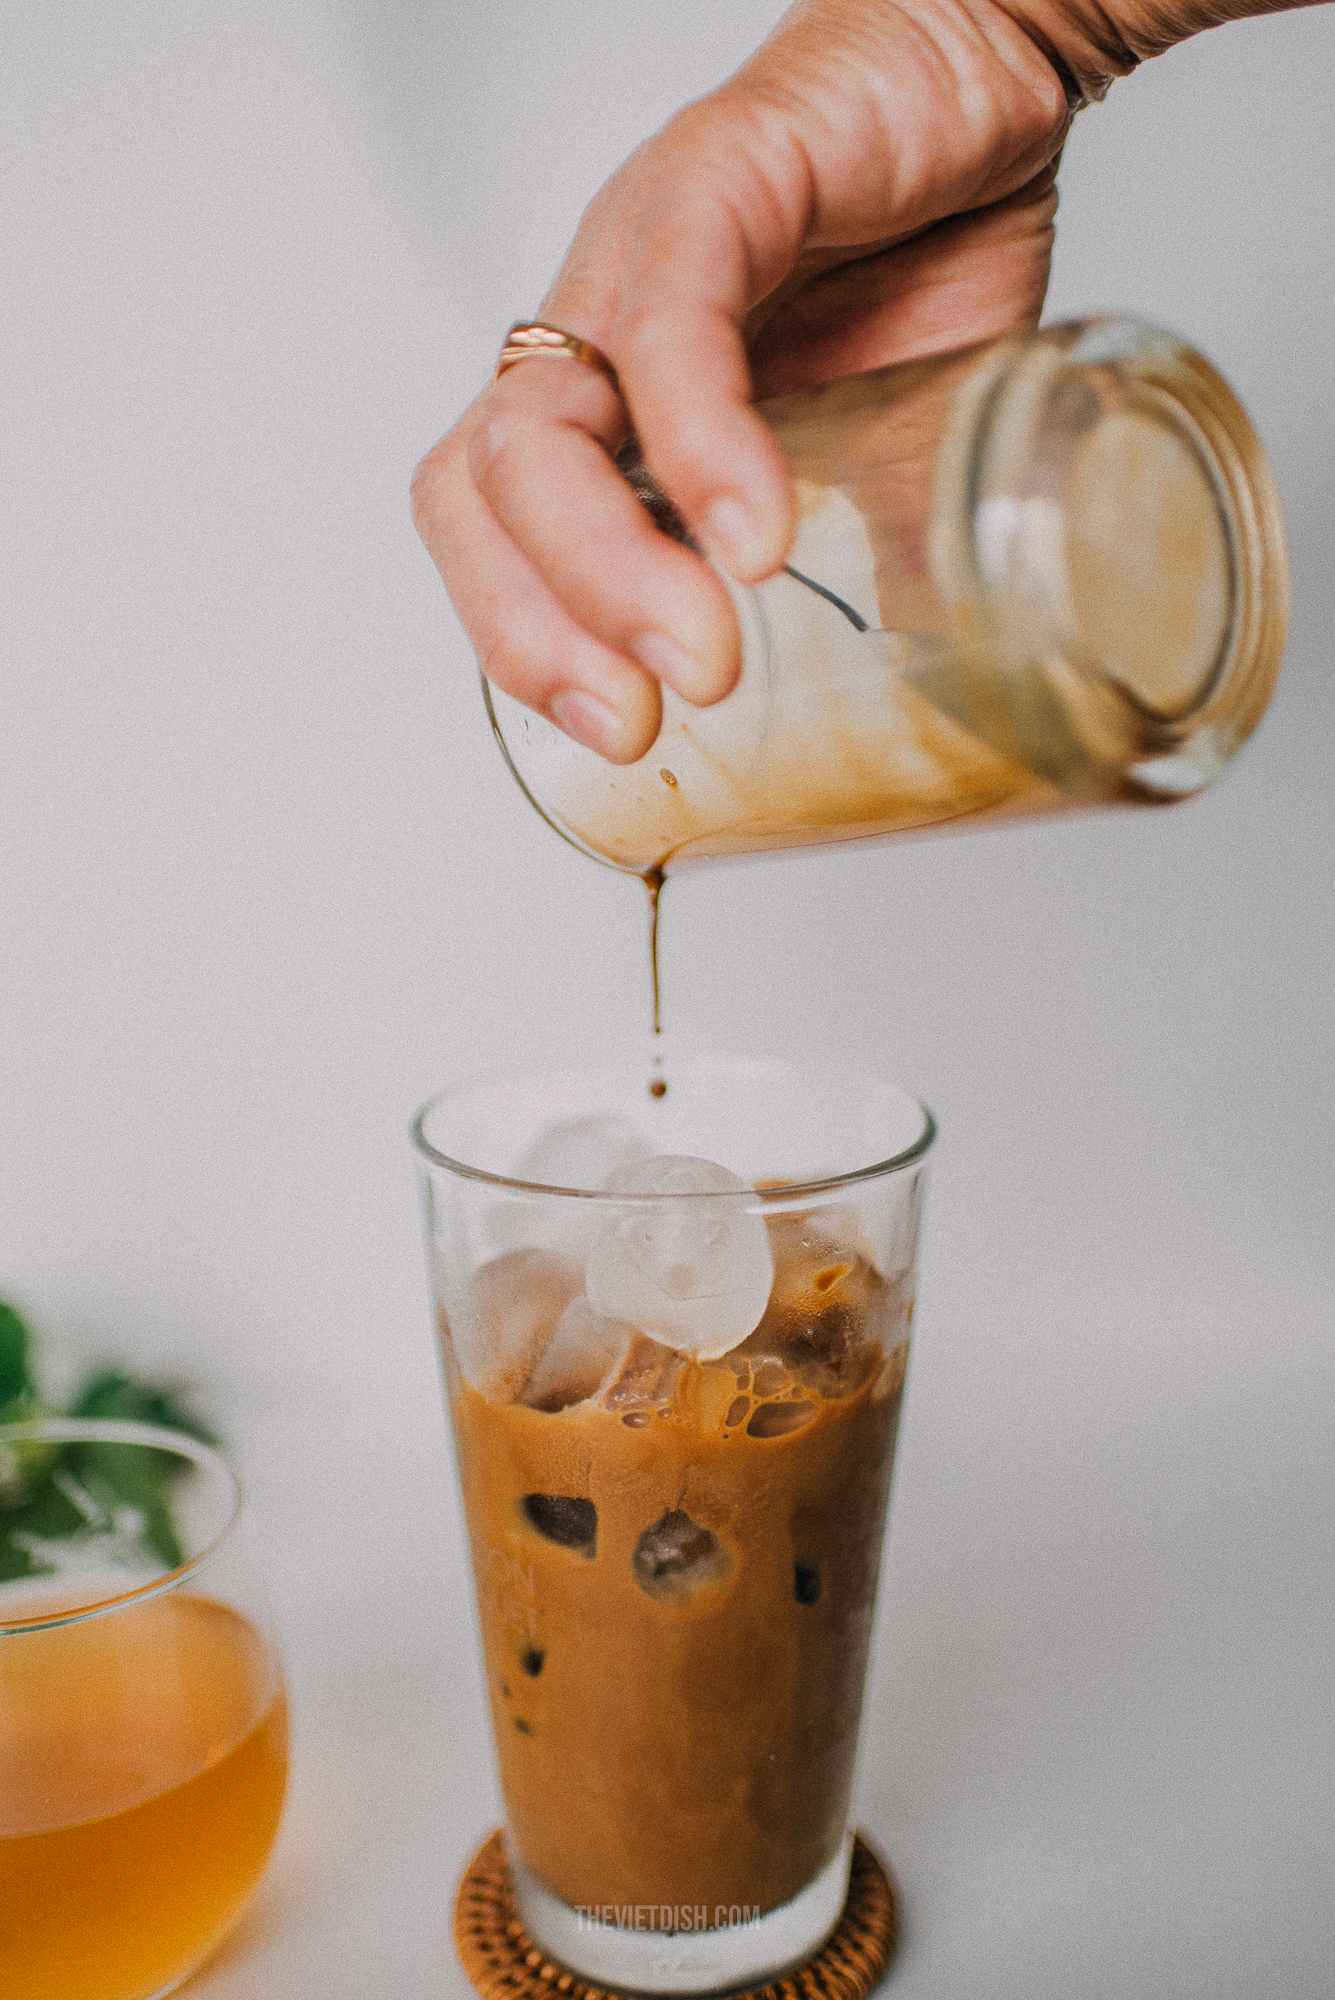 How to make Vietnamese iced coffee: Essential details